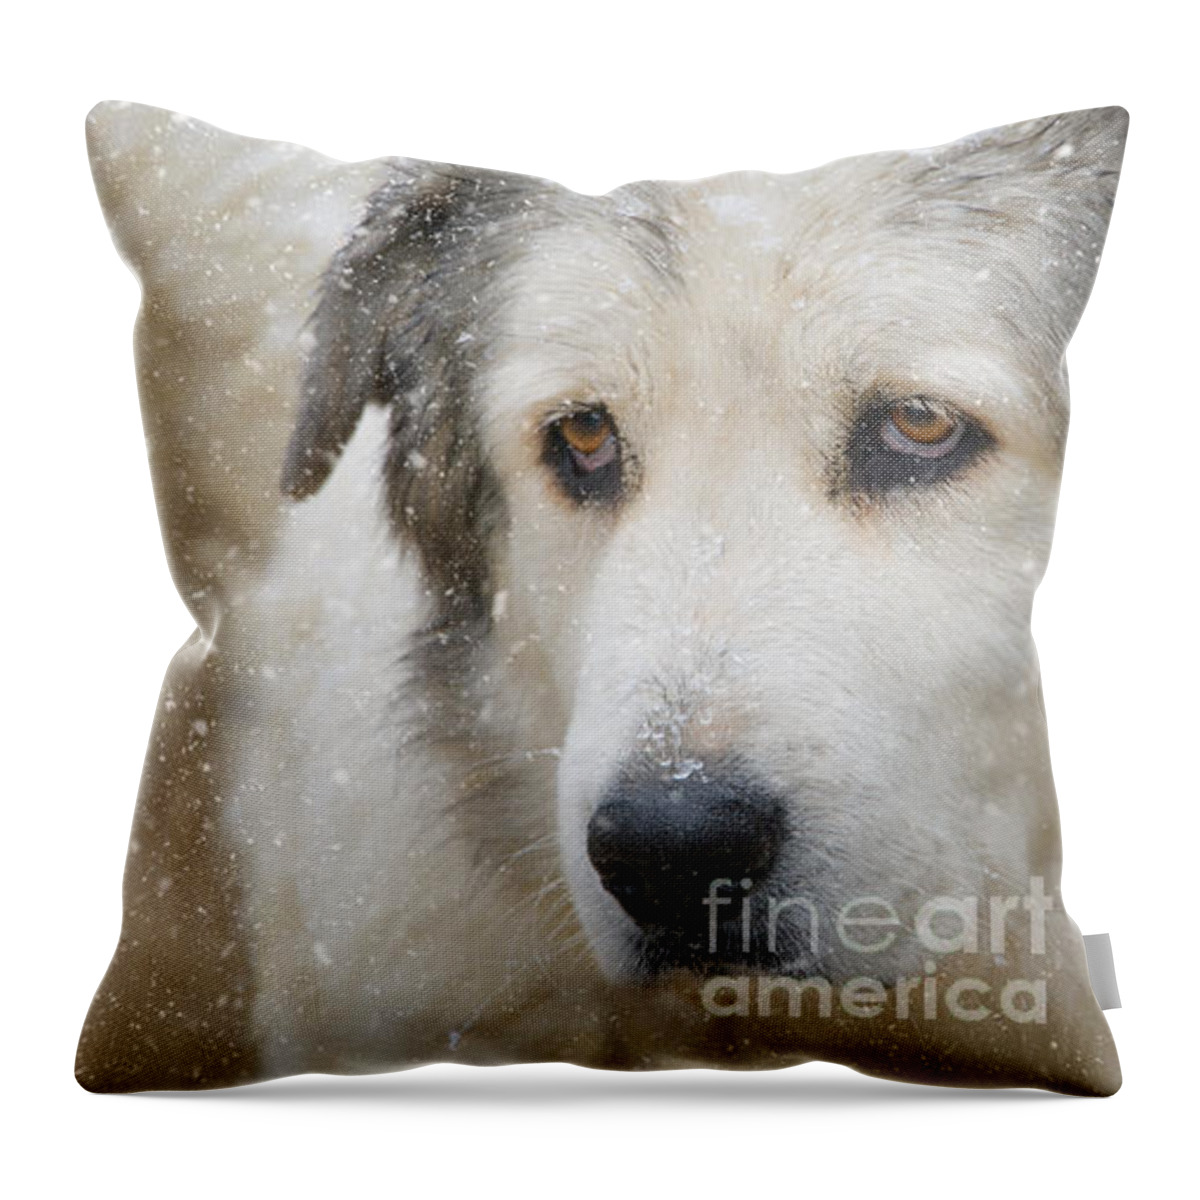 Great Pyrenees Throw Pillow featuring the photograph Wintry Nose by Lisa Manifold